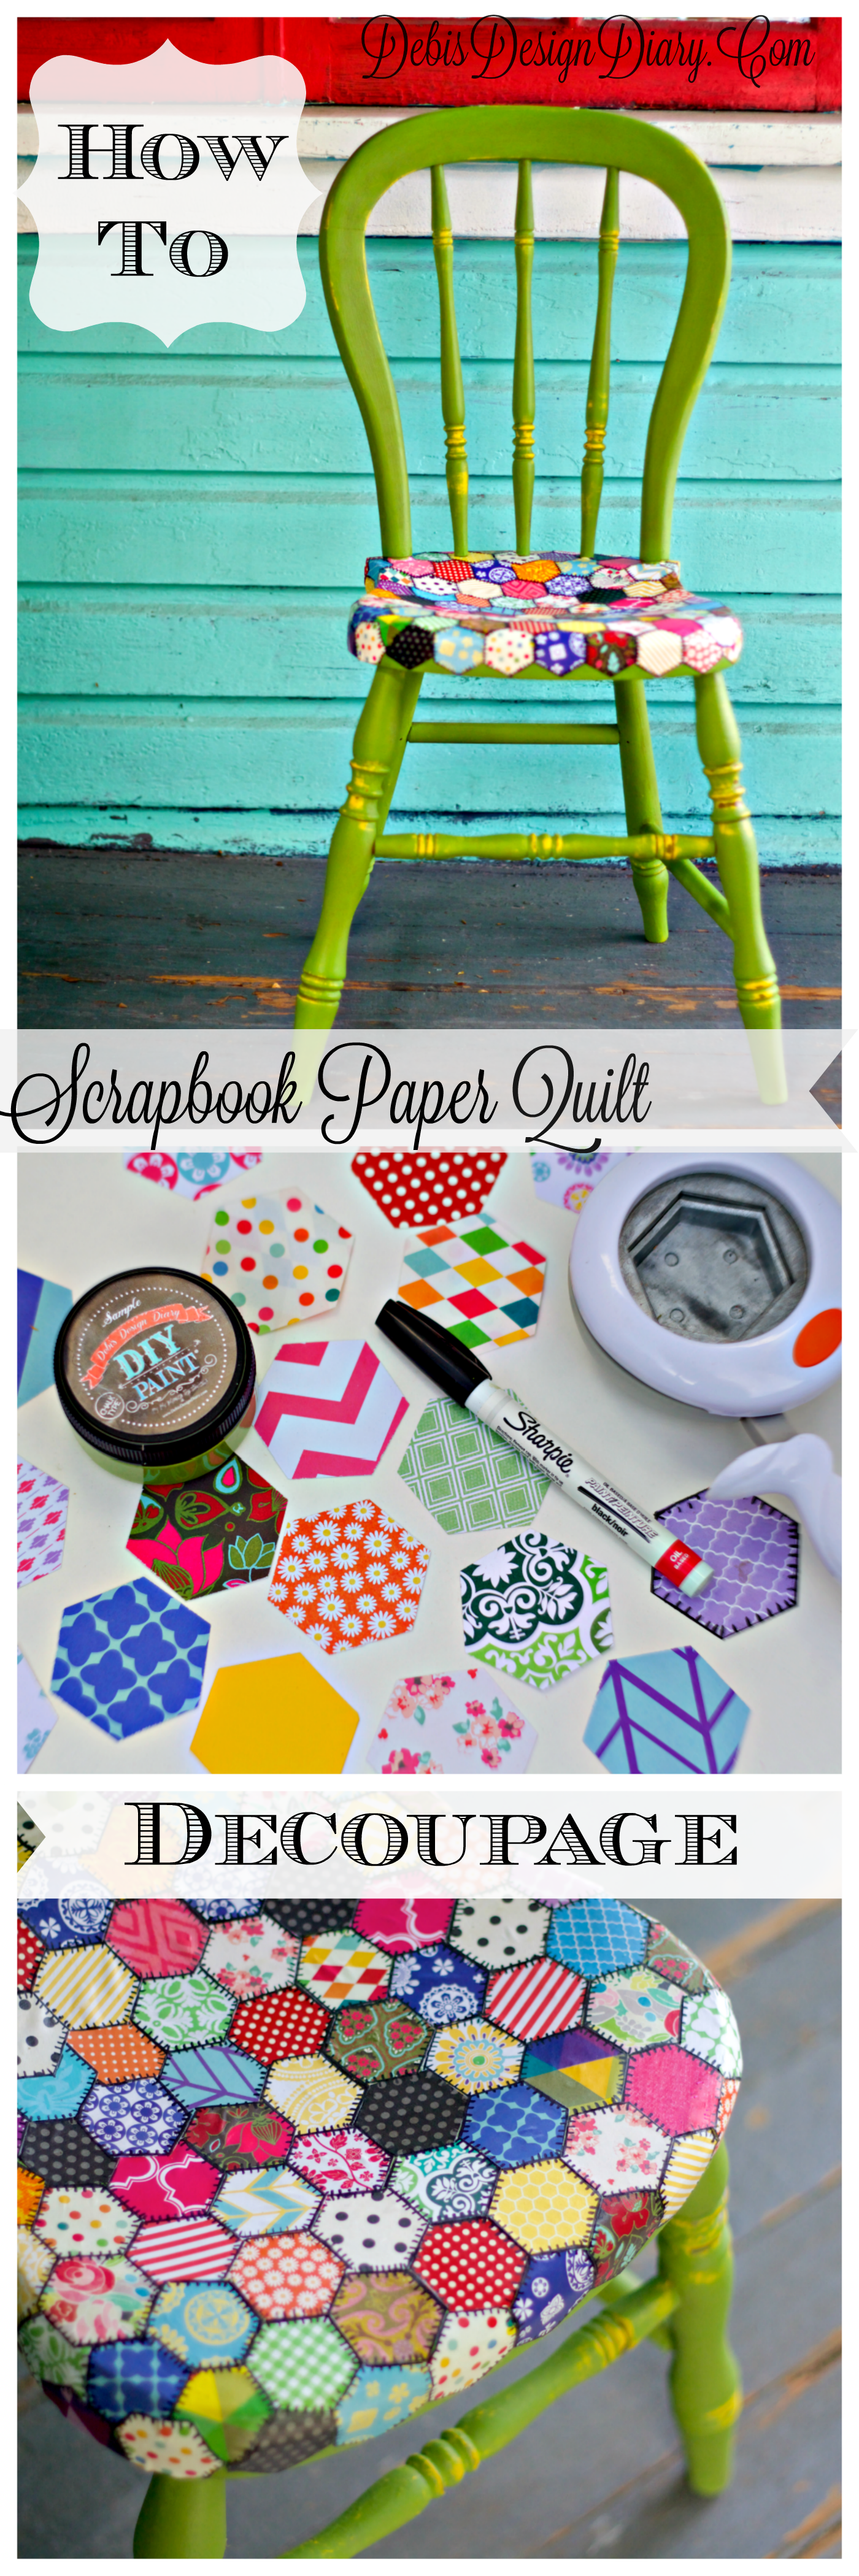 How to decoupage a quilt pattern with scrapbook paper